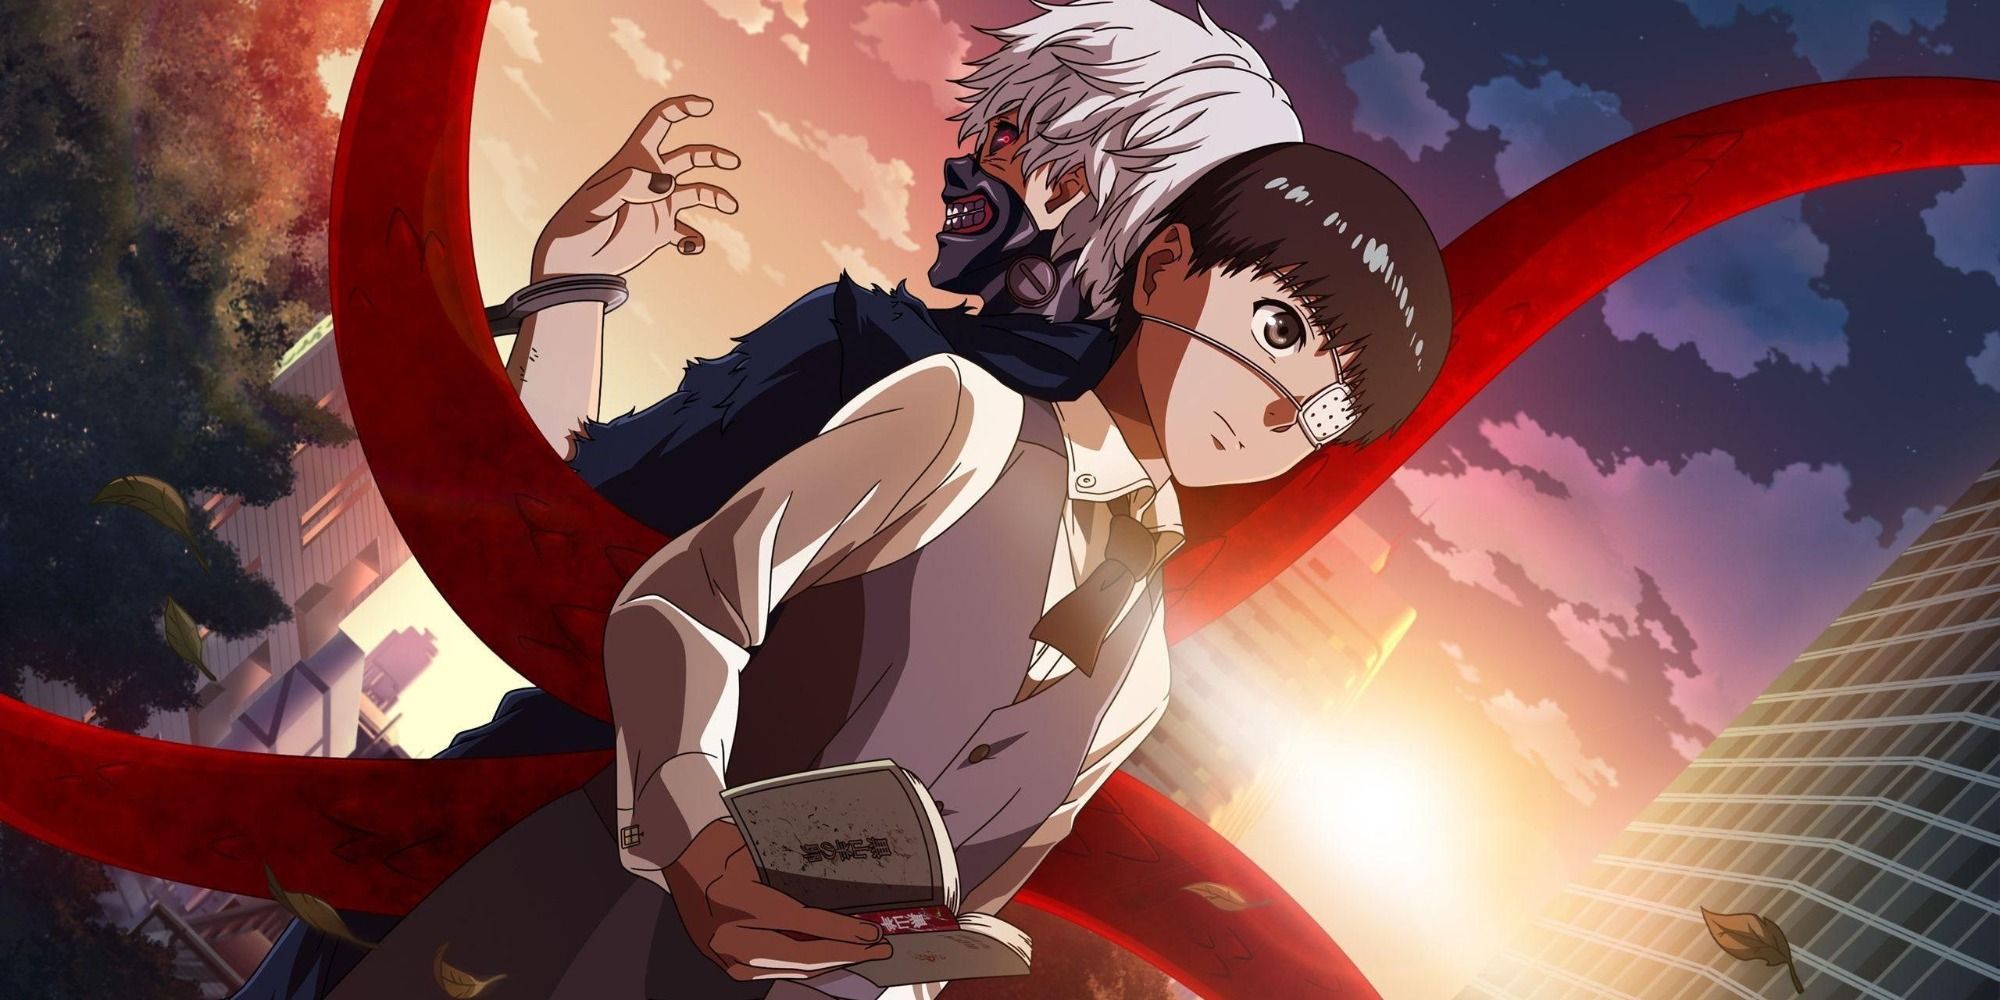 Cover art for the anime Tokyo Ghoul